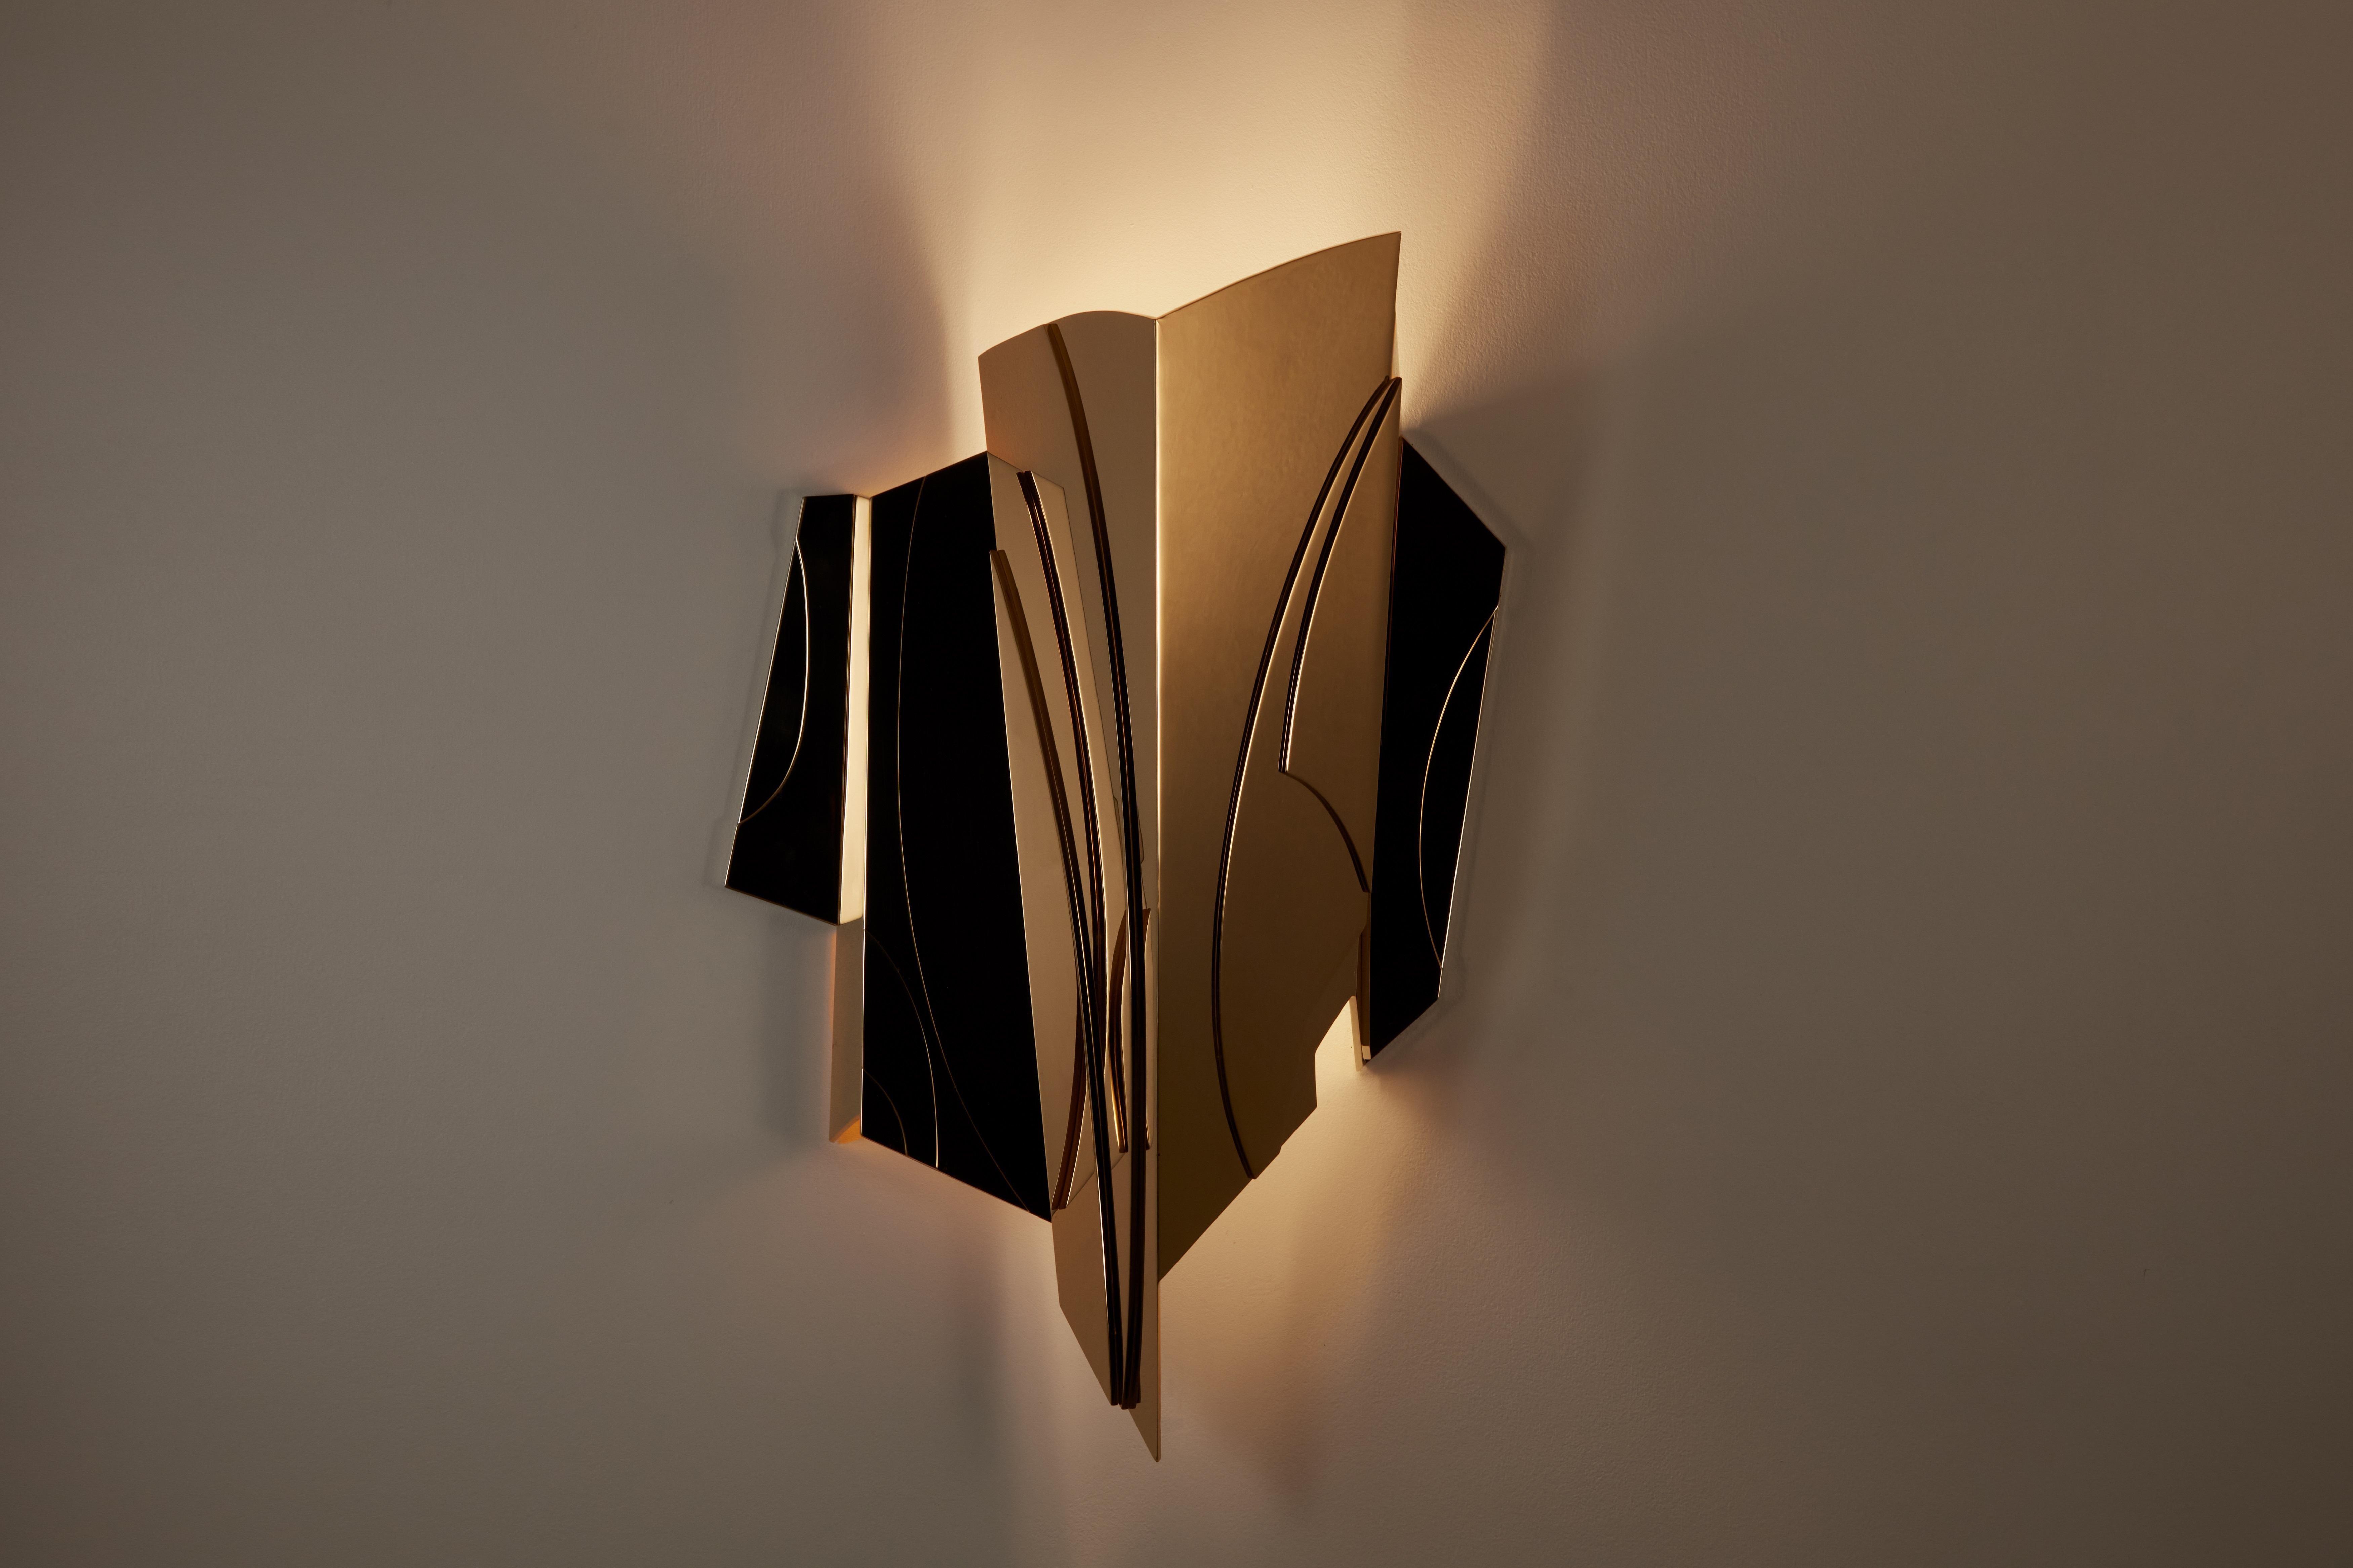 Cross Bitume wall lamp by Mydriaz
Dimensions: D14 x W 27 x H 45 cm
Materials: Brass polished pale gold, LED strip.

Our products are handmade in our workshop. Dimensions and finishes may vary slightly from one model to another dimensions can be